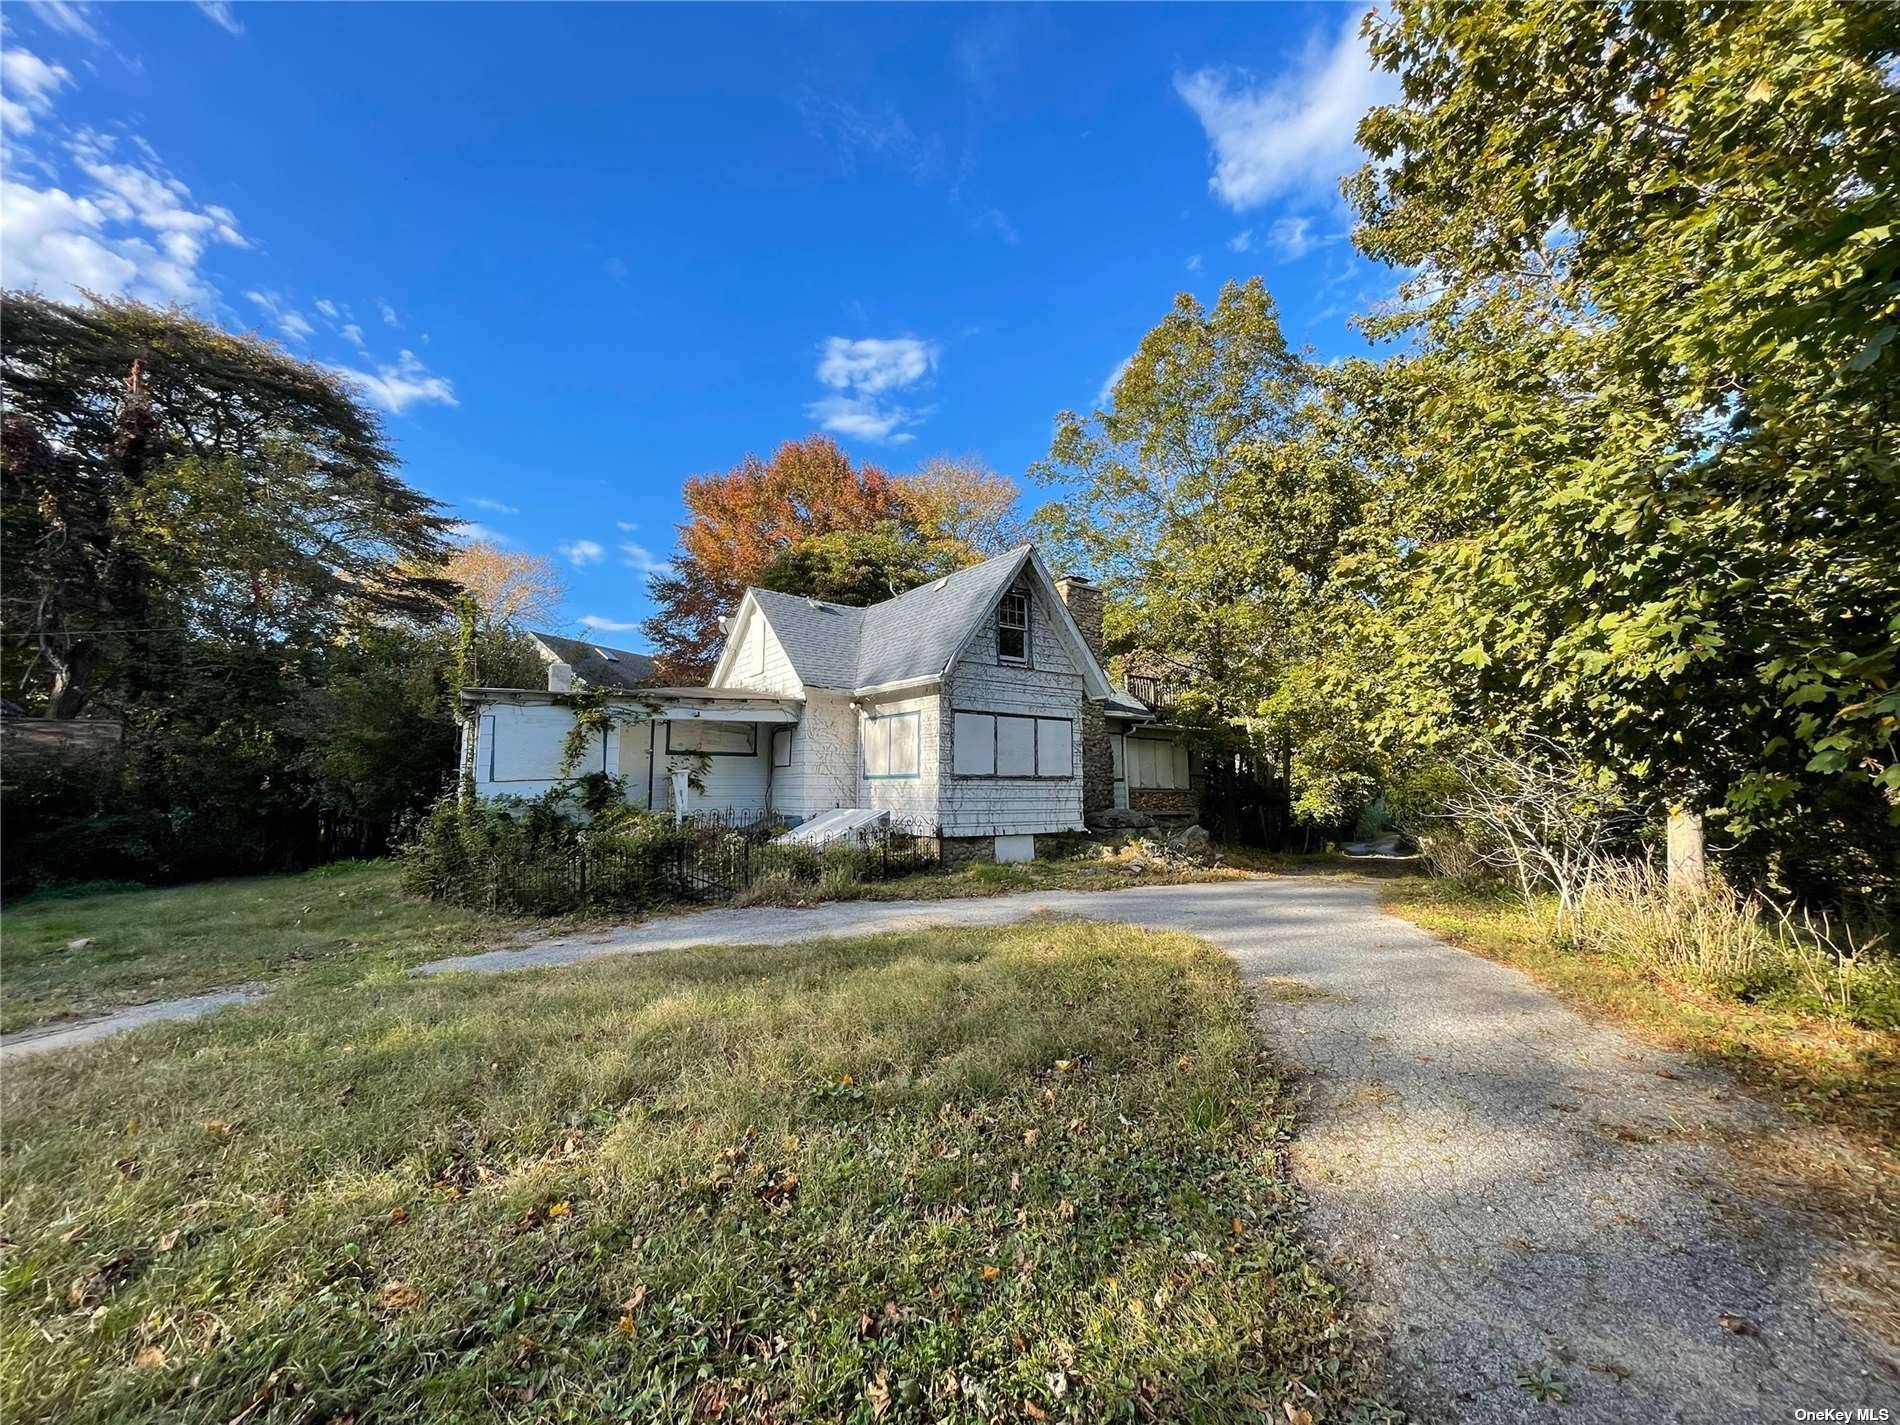 Horton's Point, Southold North Fork solid acre by beach with existing 1910 house sold in as is condition with caretaker cottage and horse stable.